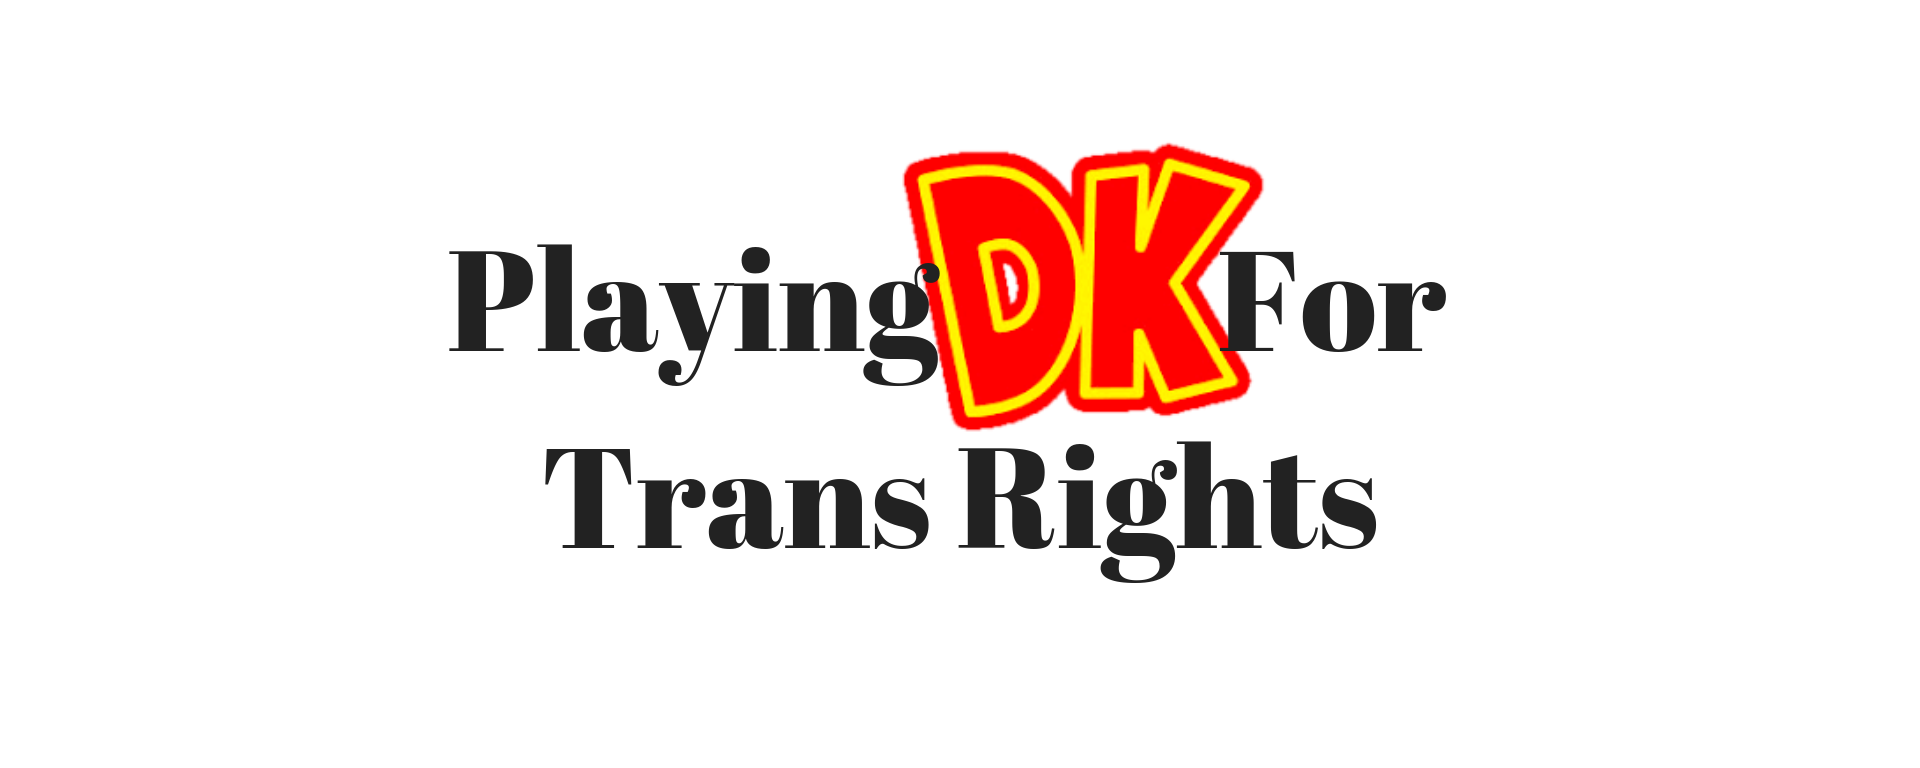 Playing Donkey Kong for Trans Rights